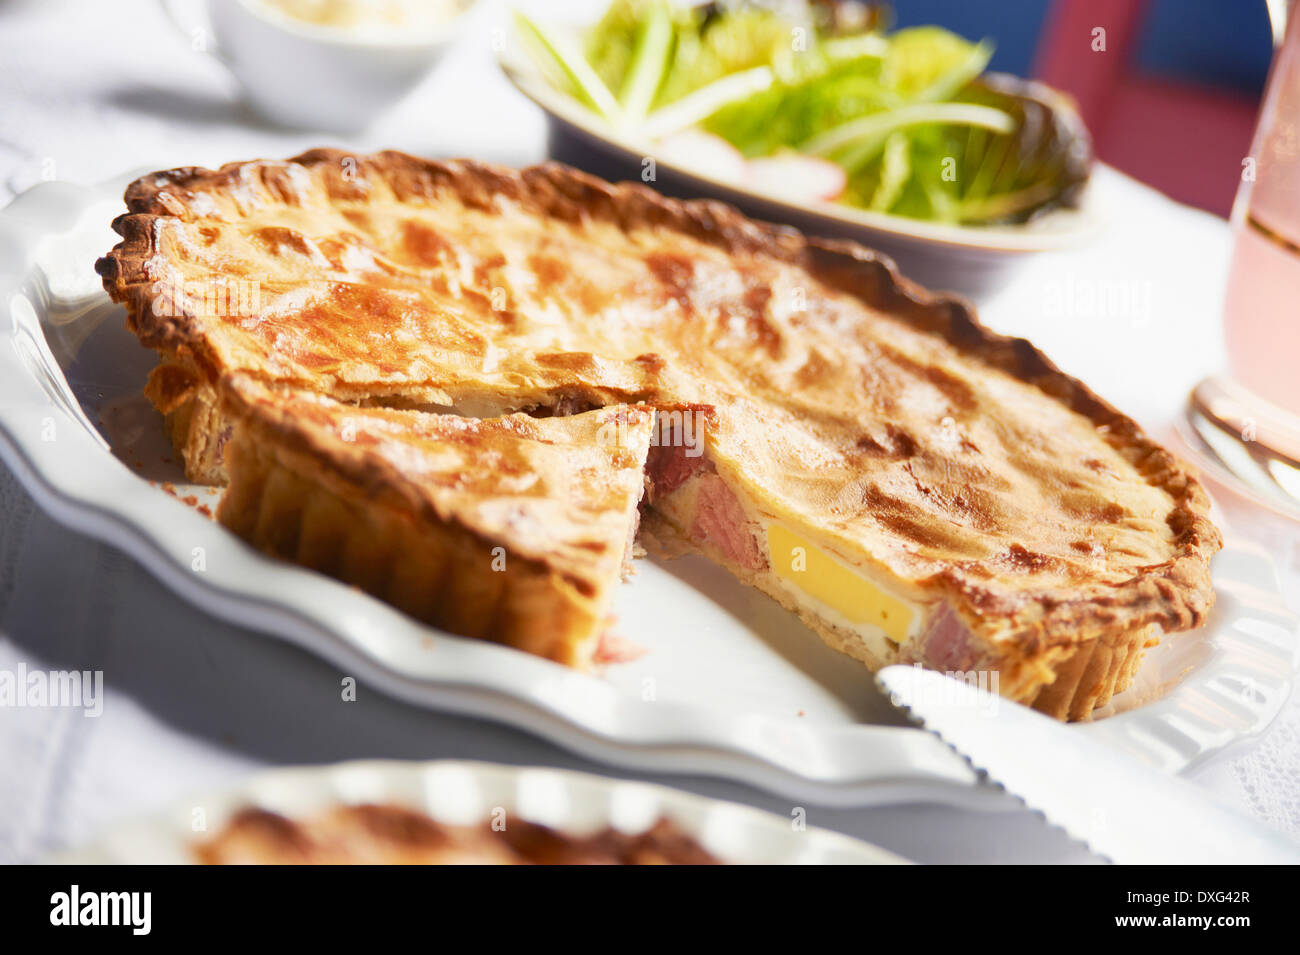 Homemade Ham And Egg Pie On Plate Stock Photo